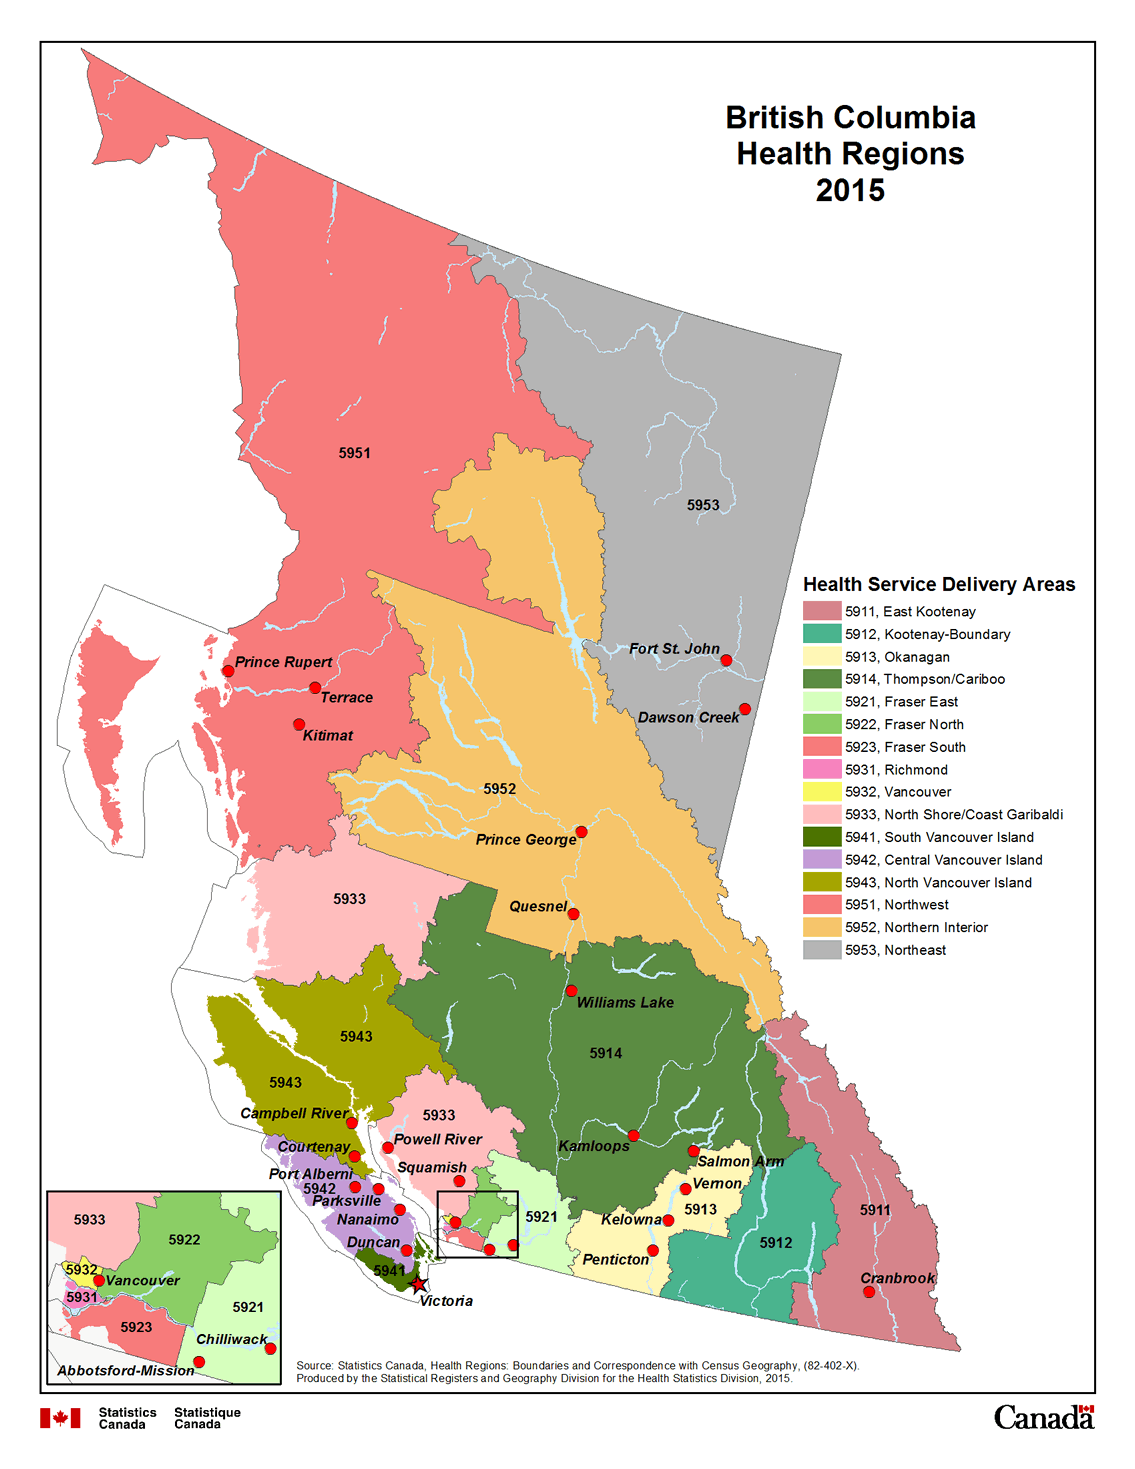 bc-health-regions-regional-centres-bc-support-unit-bc-healthy